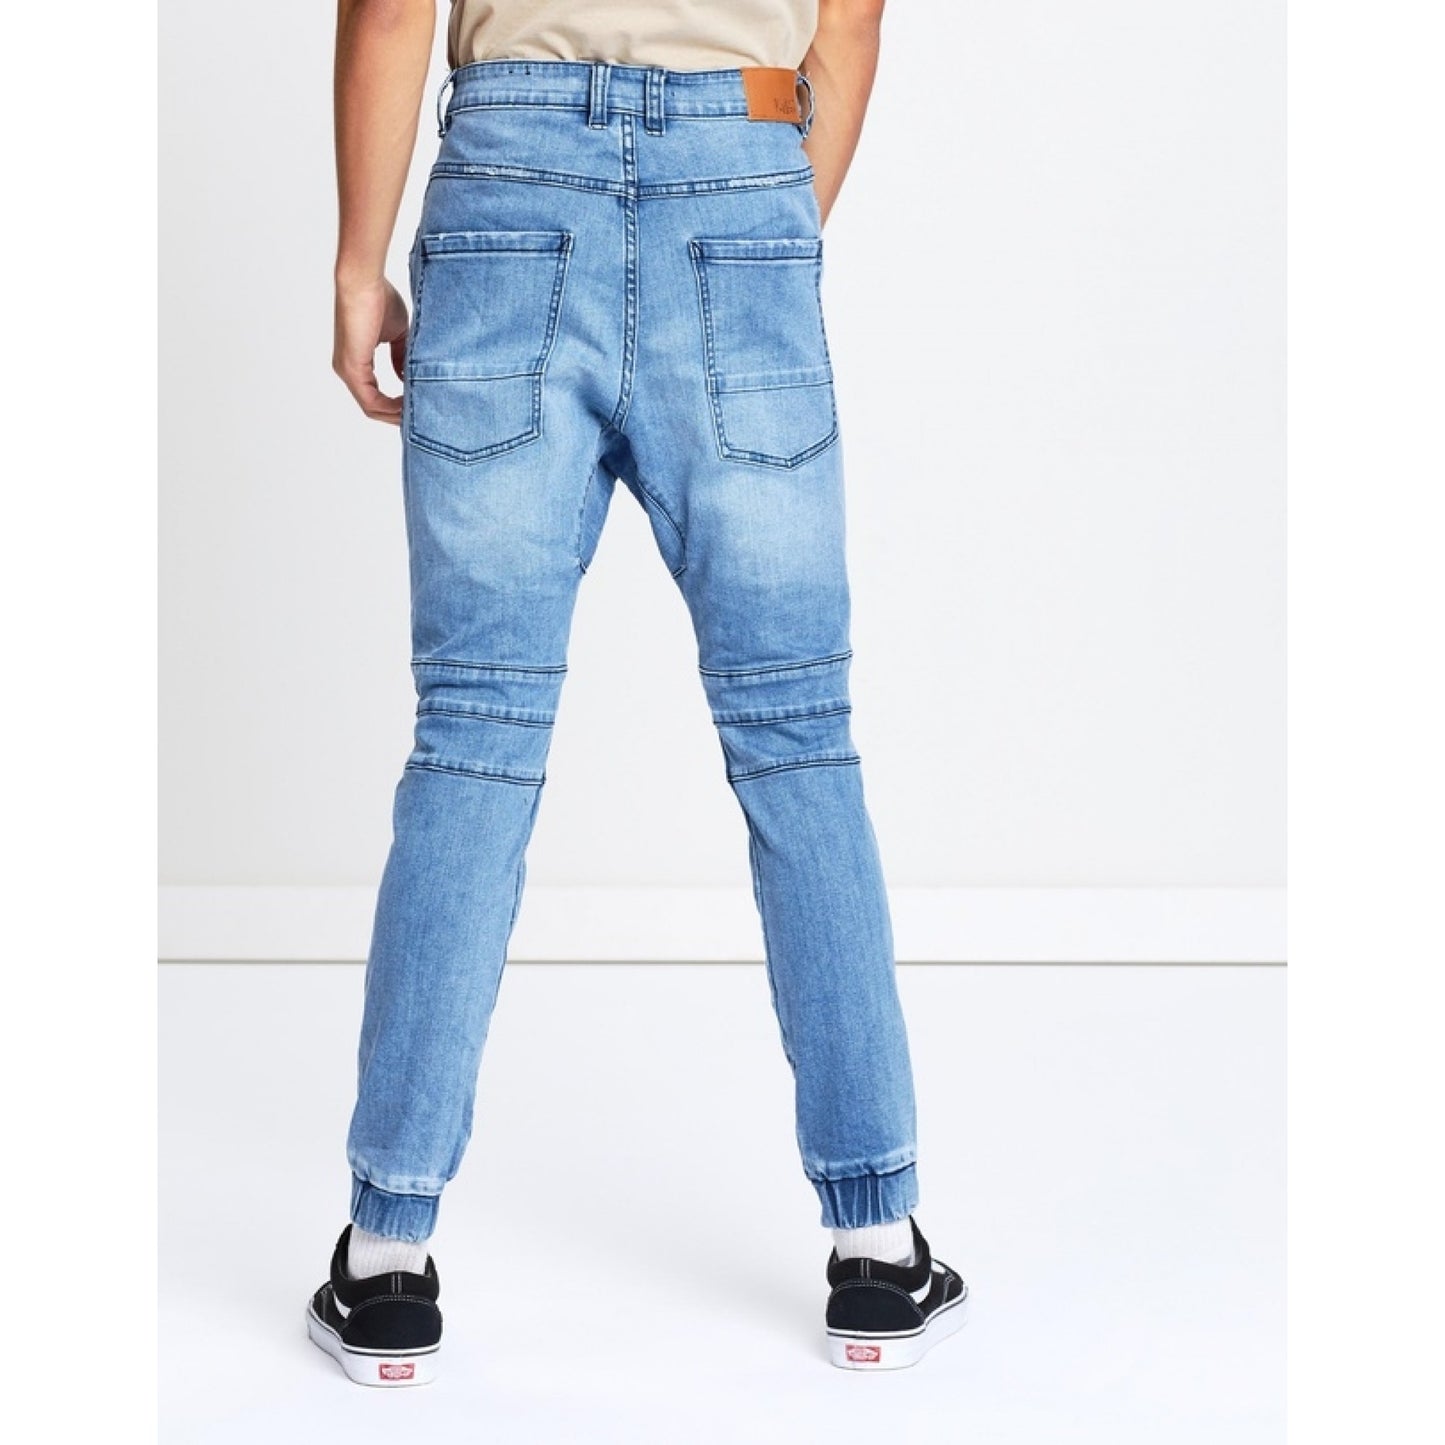 SILENT THEORY Outlaw Cuffed Mens Pant - Motley Blue - VENUE.